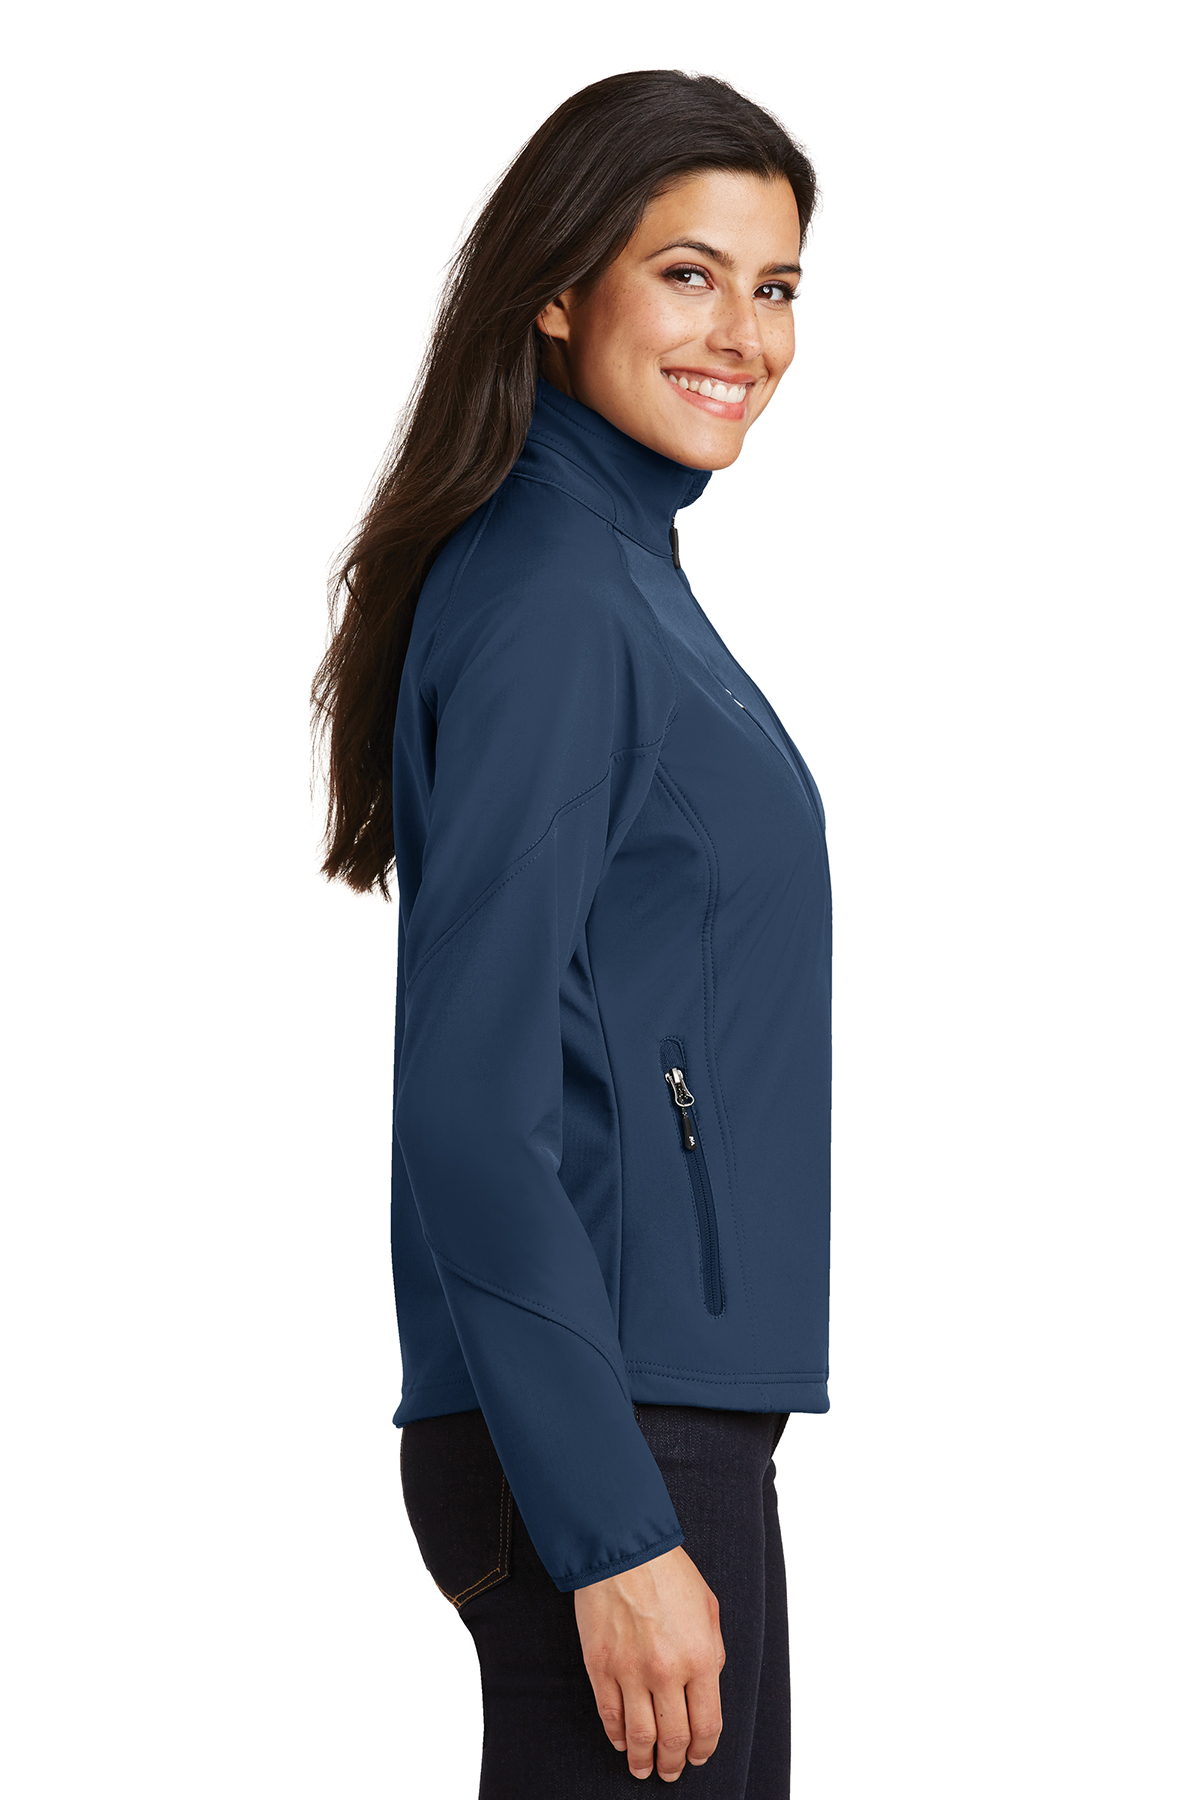 Port Authority Ladies Textured Soft Shell Jacket | Product | SanMar